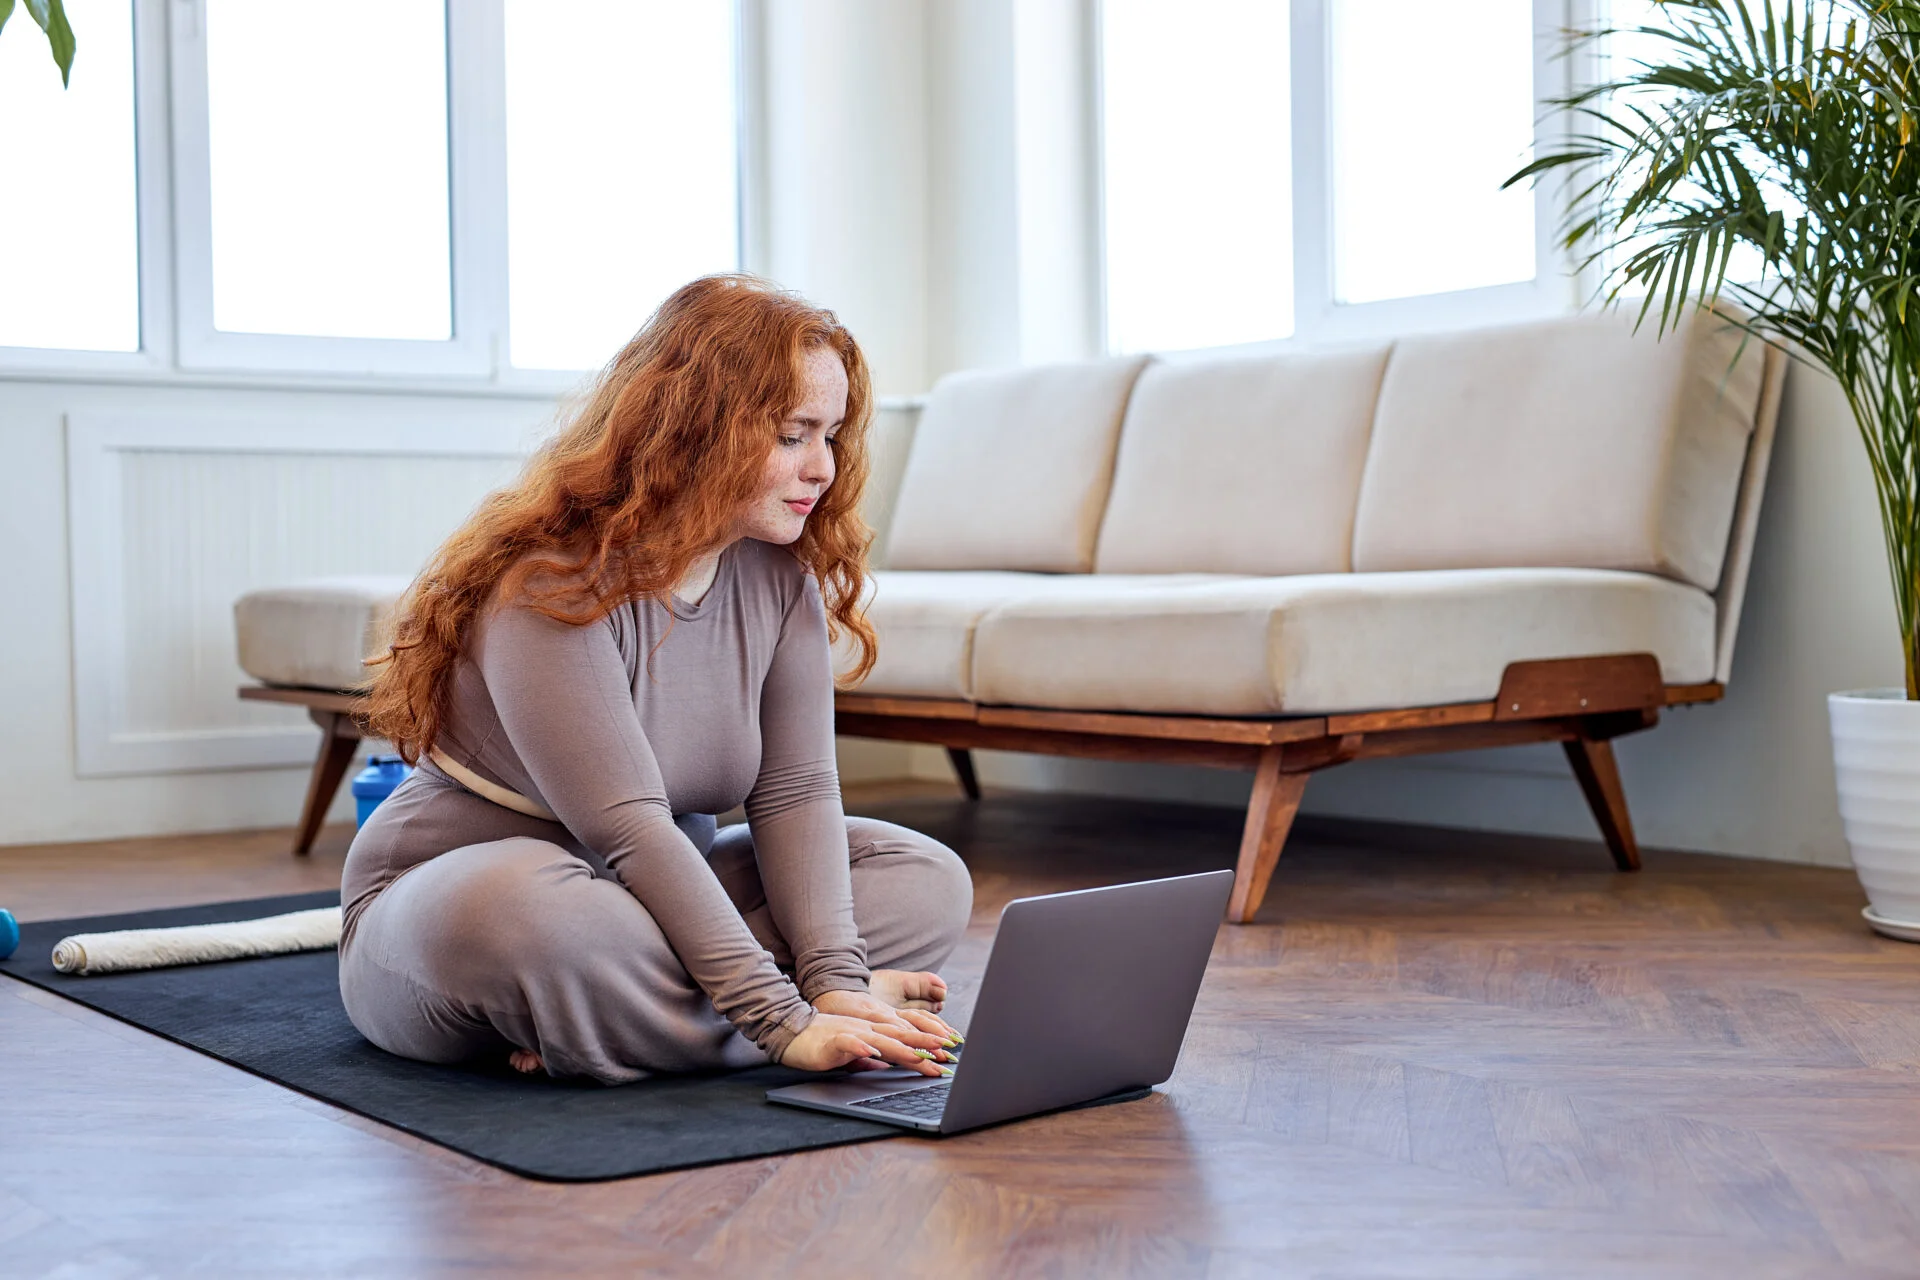 redheaded woman sitting on fitness mat at home in living room, using laptop, in sportswear